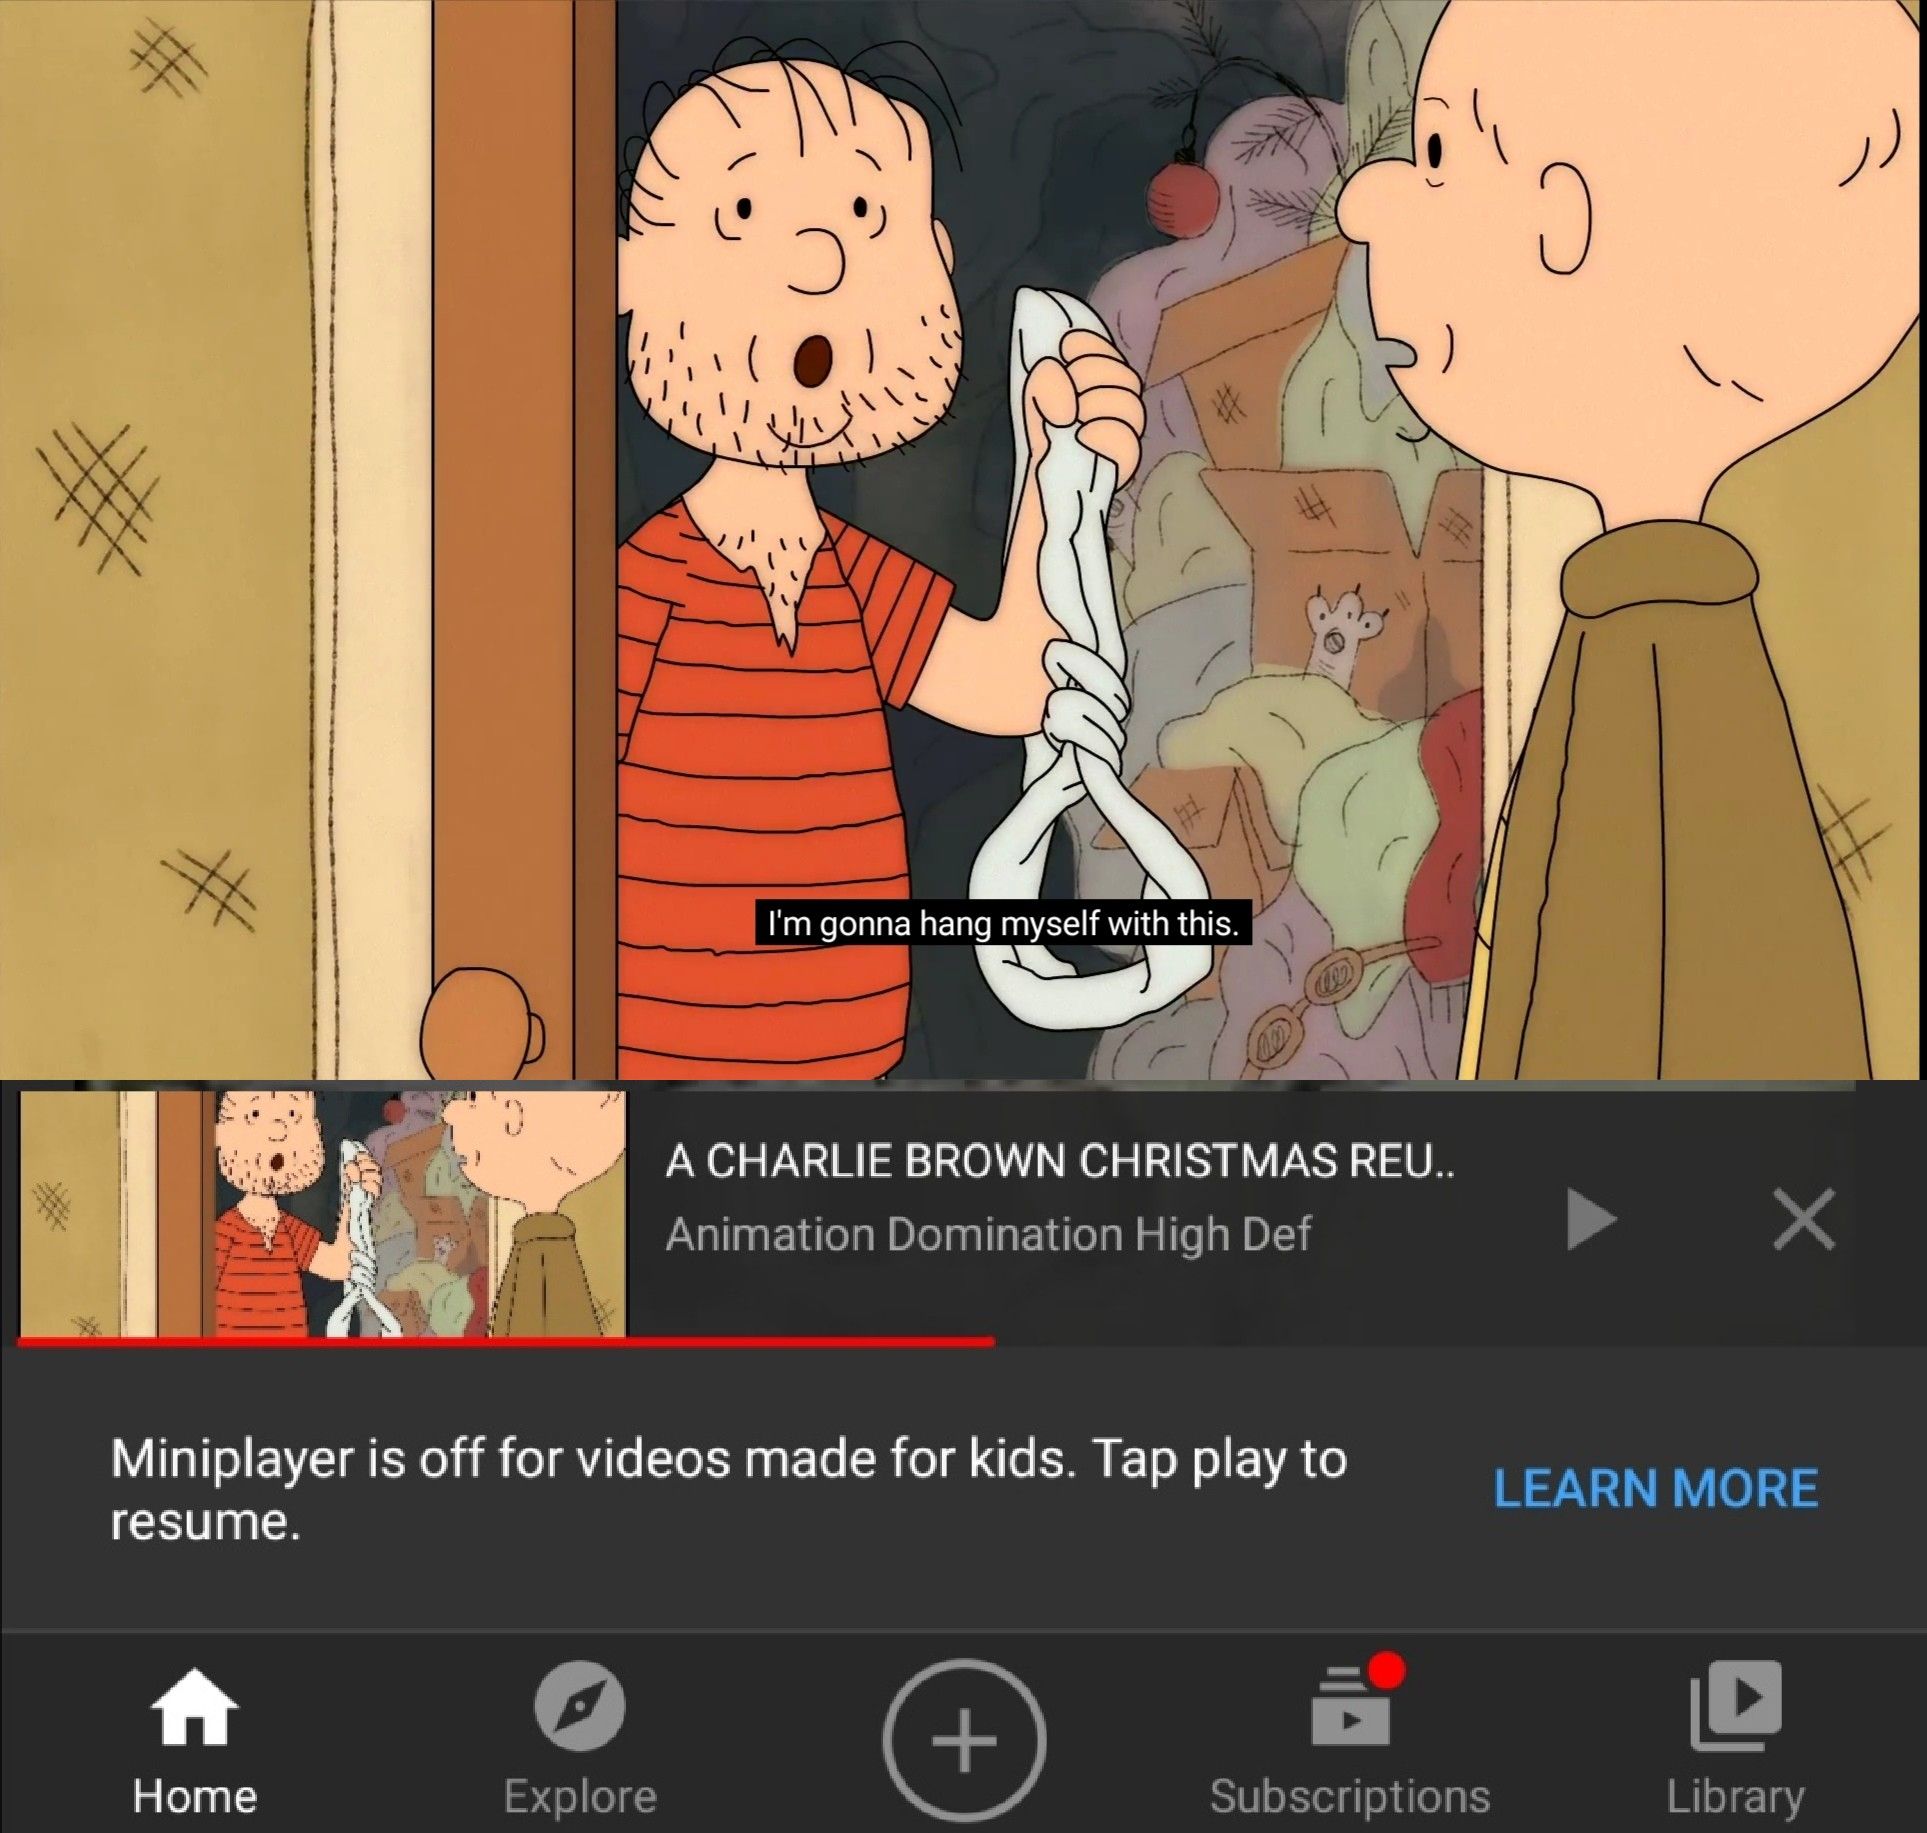 Ah, yes, videos made for kids.